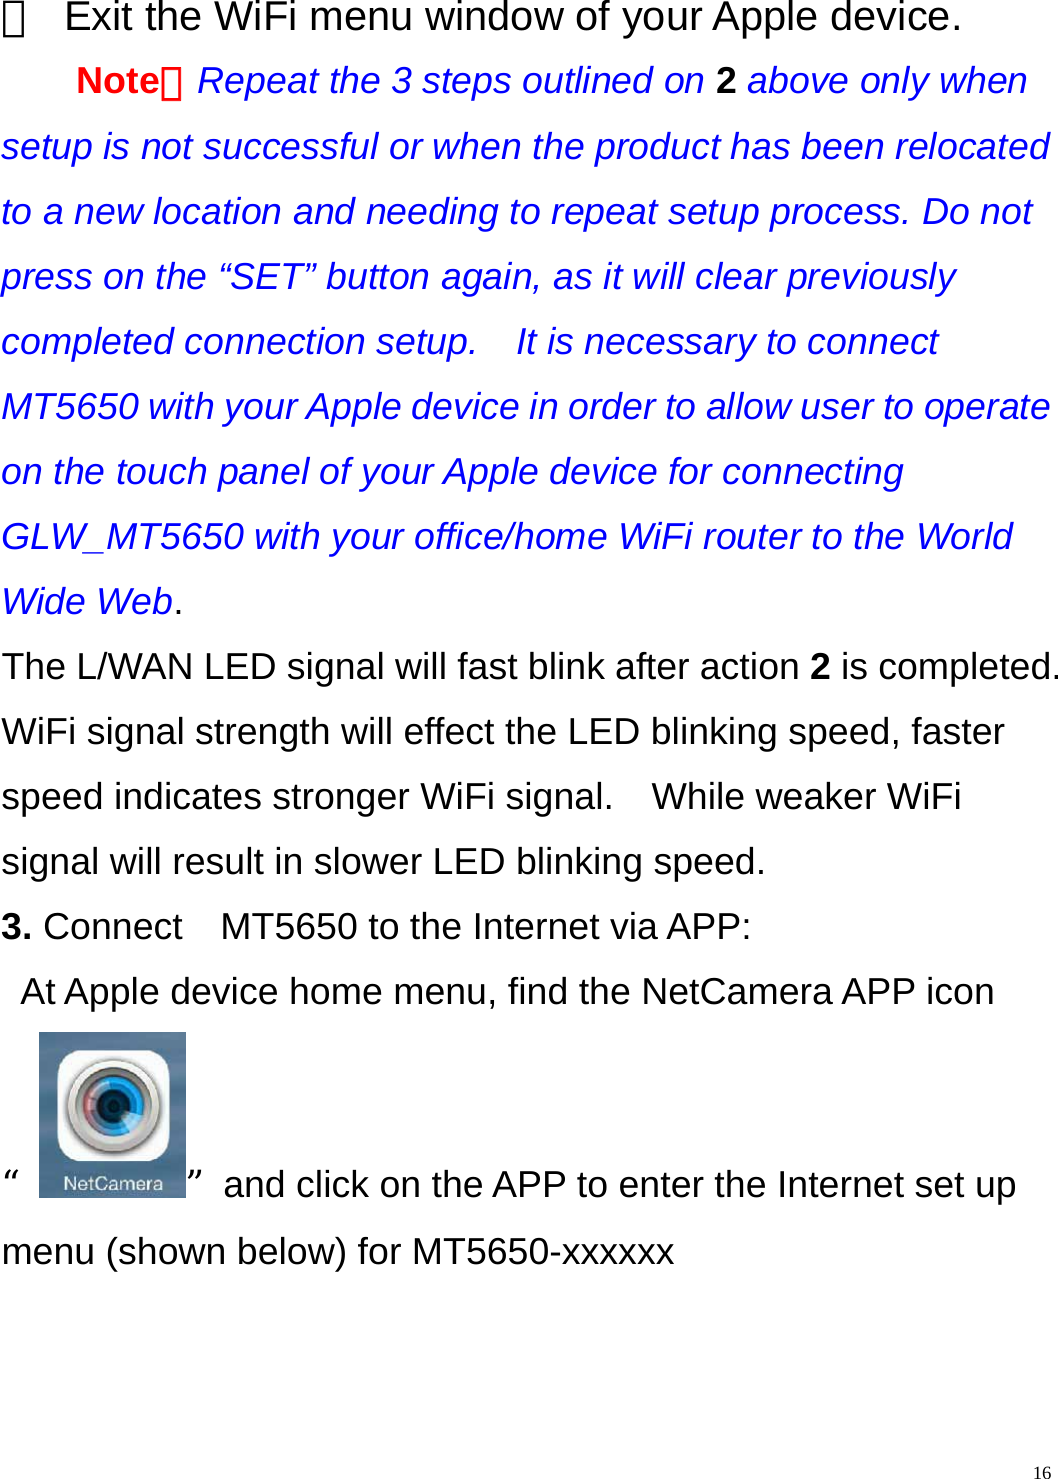    16③  Exit the WiFi menu window of your Apple device. Note：Repeat the 3 steps outlined on 2 above only when setup is not successful or when the product has been relocated to a new location and needing to repeat setup process. Do not press on the “SET” button again, as it will clear previously completed connection setup.    It is necessary to connect MT5650 with your Apple device in order to allow user to operate on the touch panel of your Apple device for connecting GLW_MT5650 with your office/home WiFi router to the World Wide Web. The L/WAN LED signal will fast blink after action 2 is completed. WiFi signal strength will effect the LED blinking speed, faster speed indicates stronger WiFi signal.    While weaker WiFi signal will result in slower LED blinking speed. 3. Connect    MT5650 to the Internet via APP: At Apple device home menu, find the NetCamera APP icon “”and click on the APP to enter the Internet set up menu (shown below) for MT5650-xxxxxx 